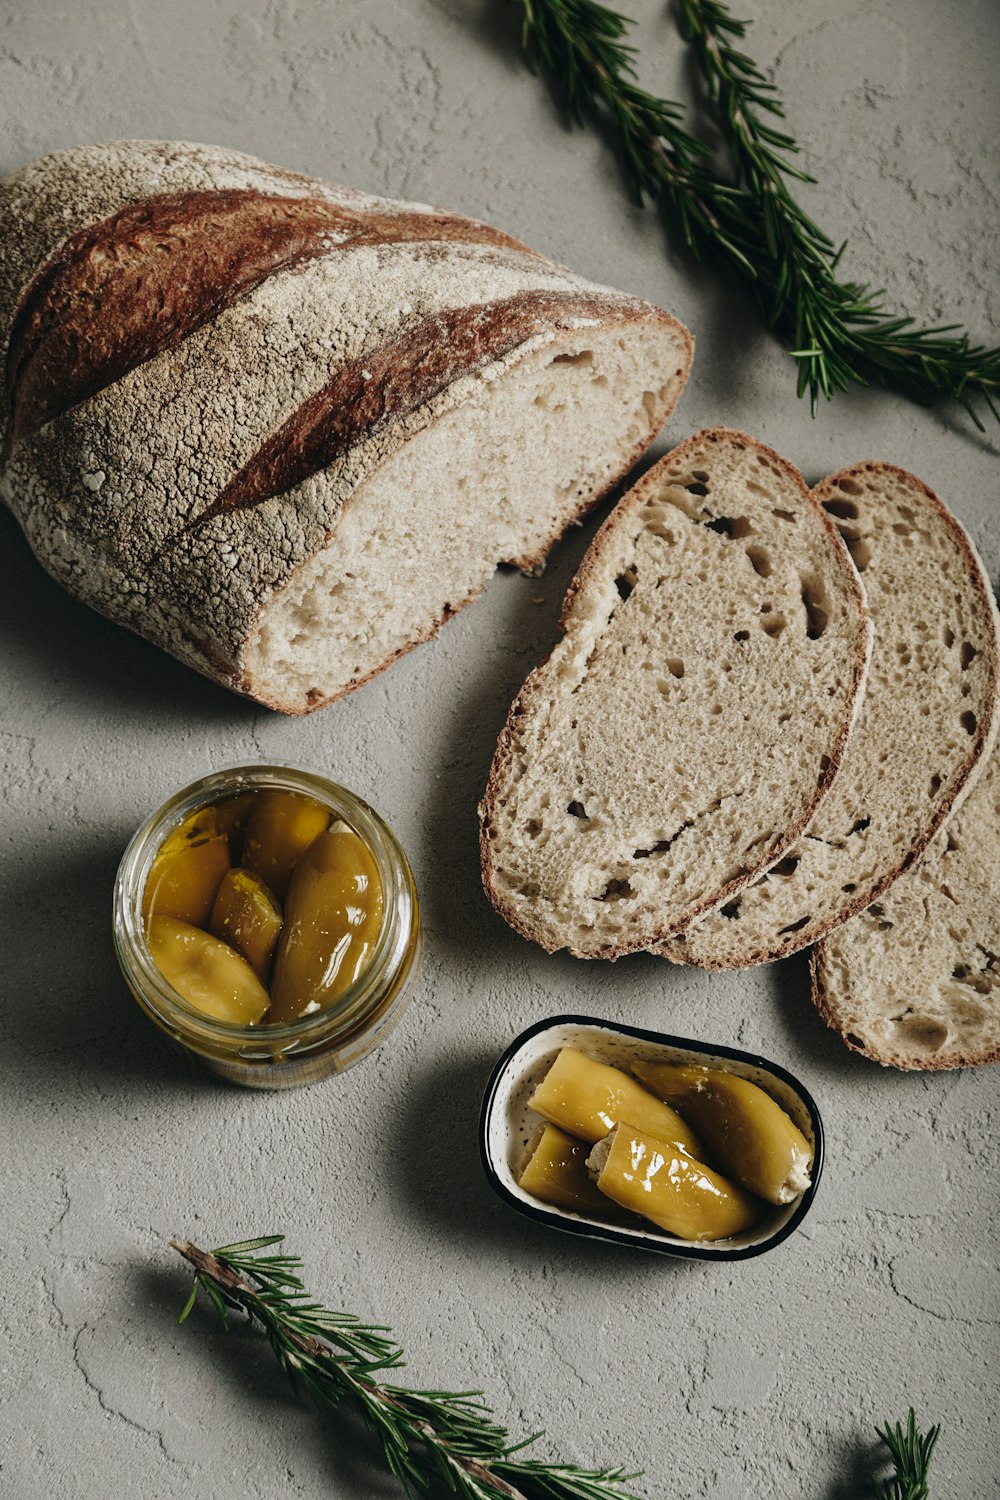 a loaf of bread with olives and a jar of pickles